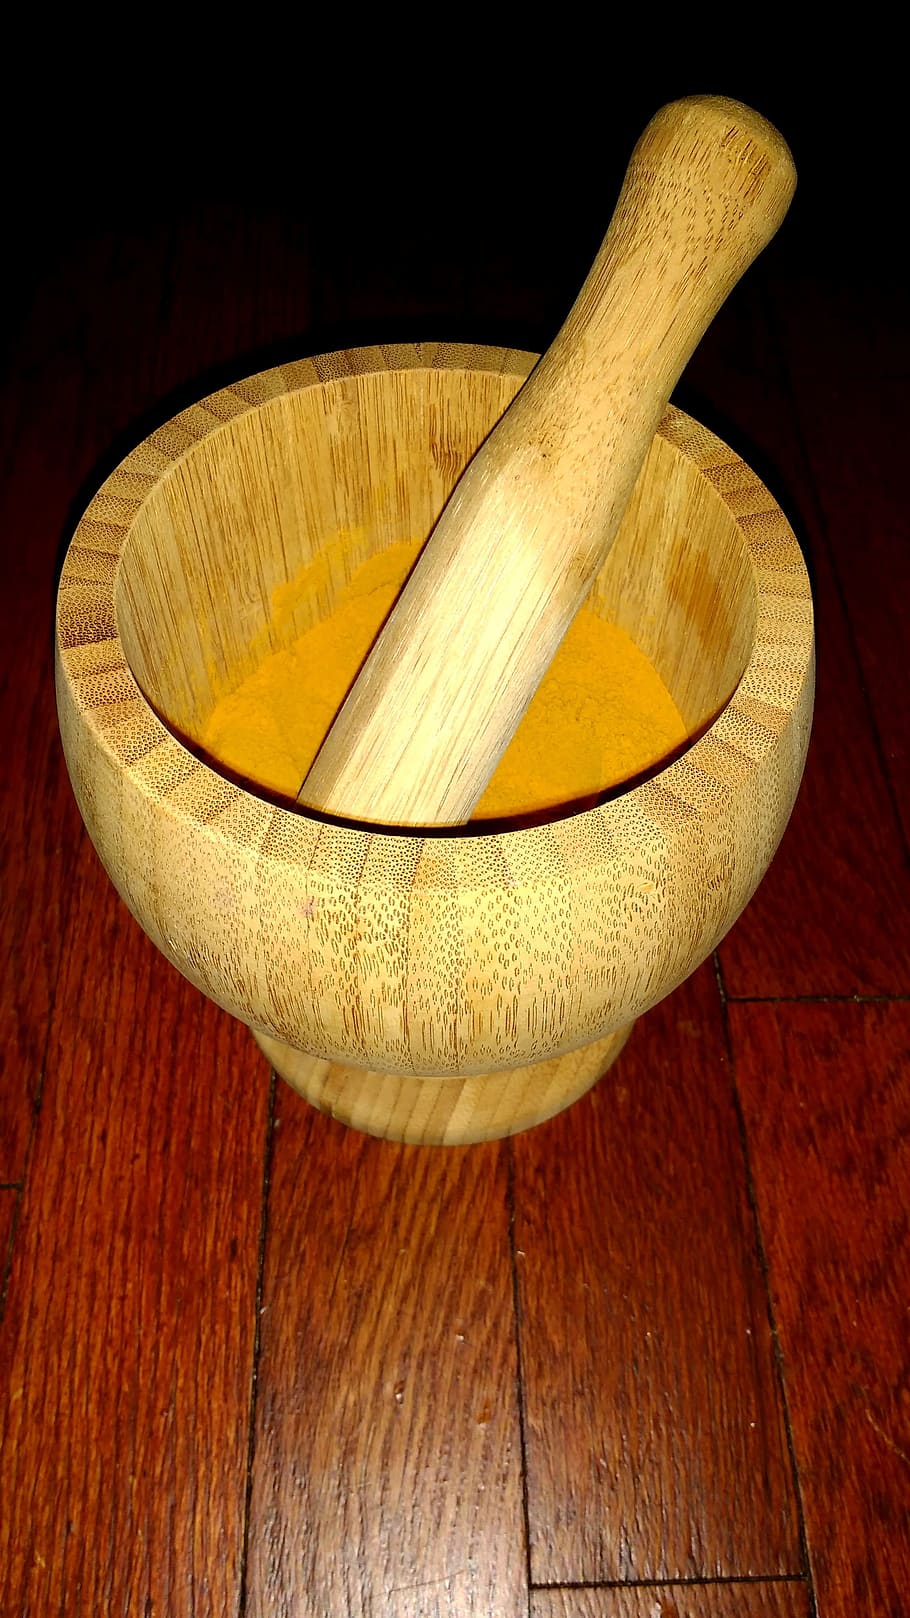 turmeric, health, cancer cure, heart, herb, cure, natural foods, organic, wood - material, still life